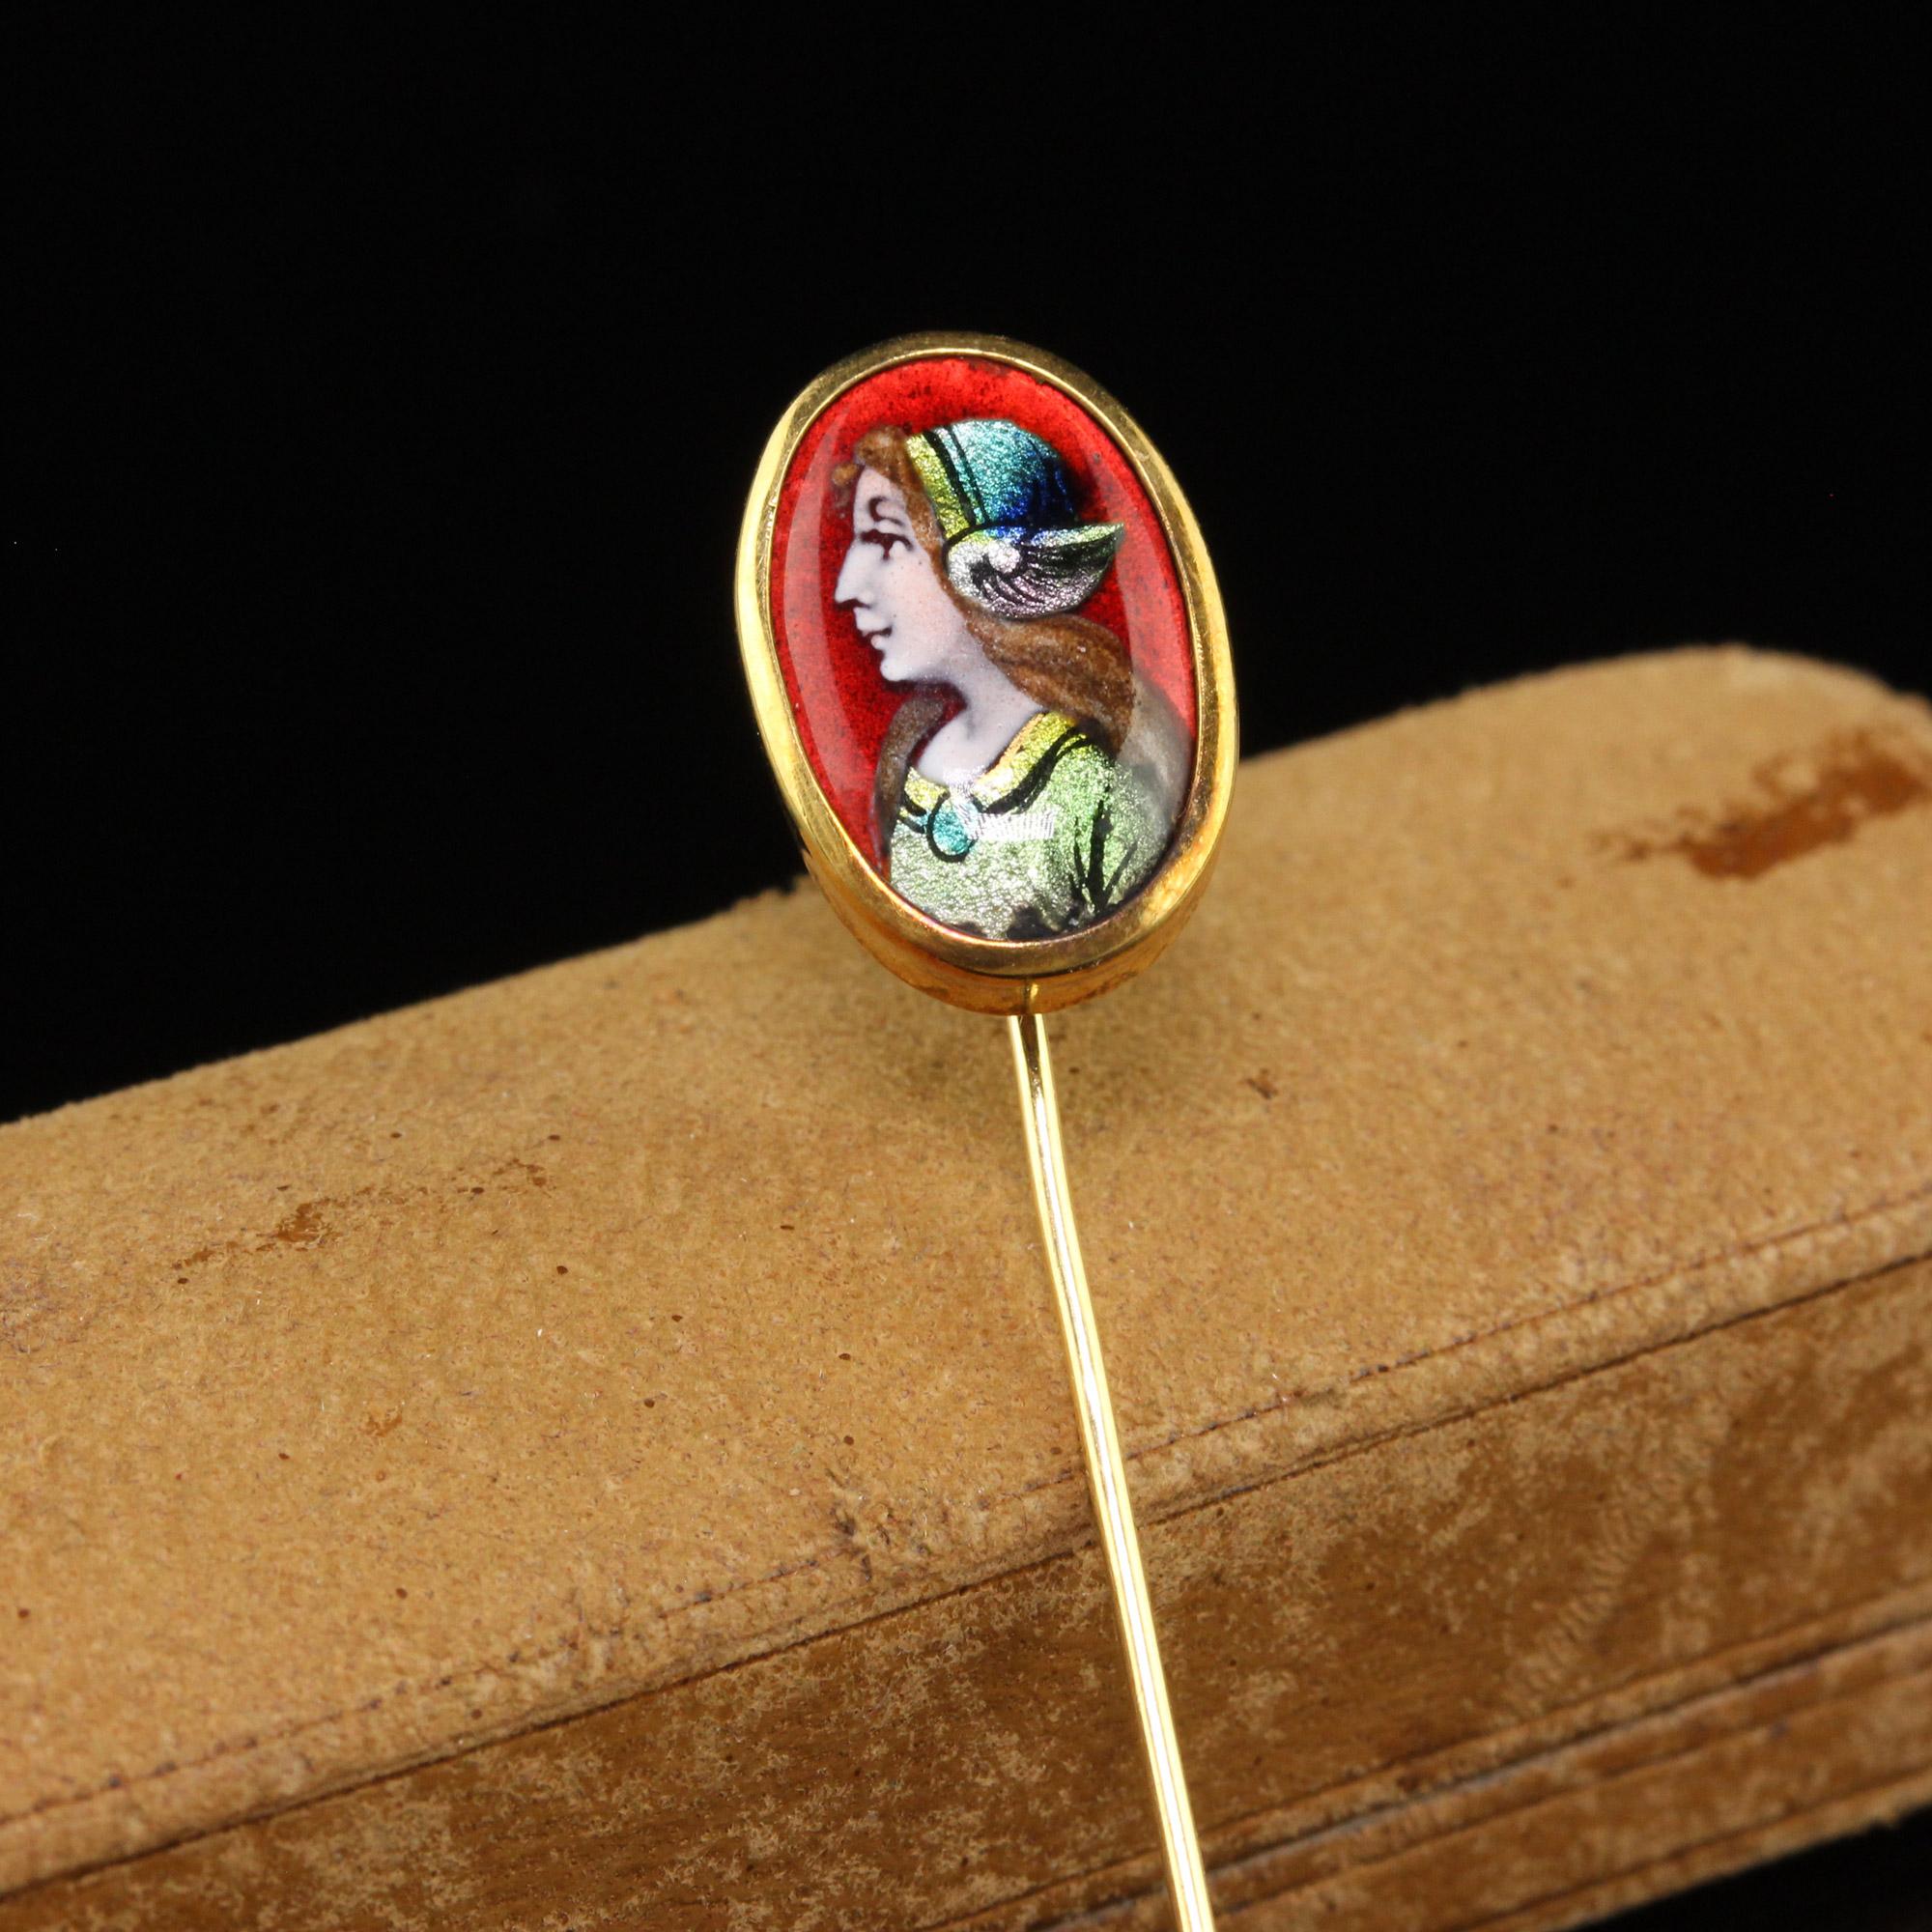 Beautiful Antique Victorian 18K Yellow French Enameled Woman Stick Pin. This gorgeous stick pin is crafted in 18k yellow gold. The pin features a well dressed woman in enamel. The back of the portrait is signed but we can not make out the name. The